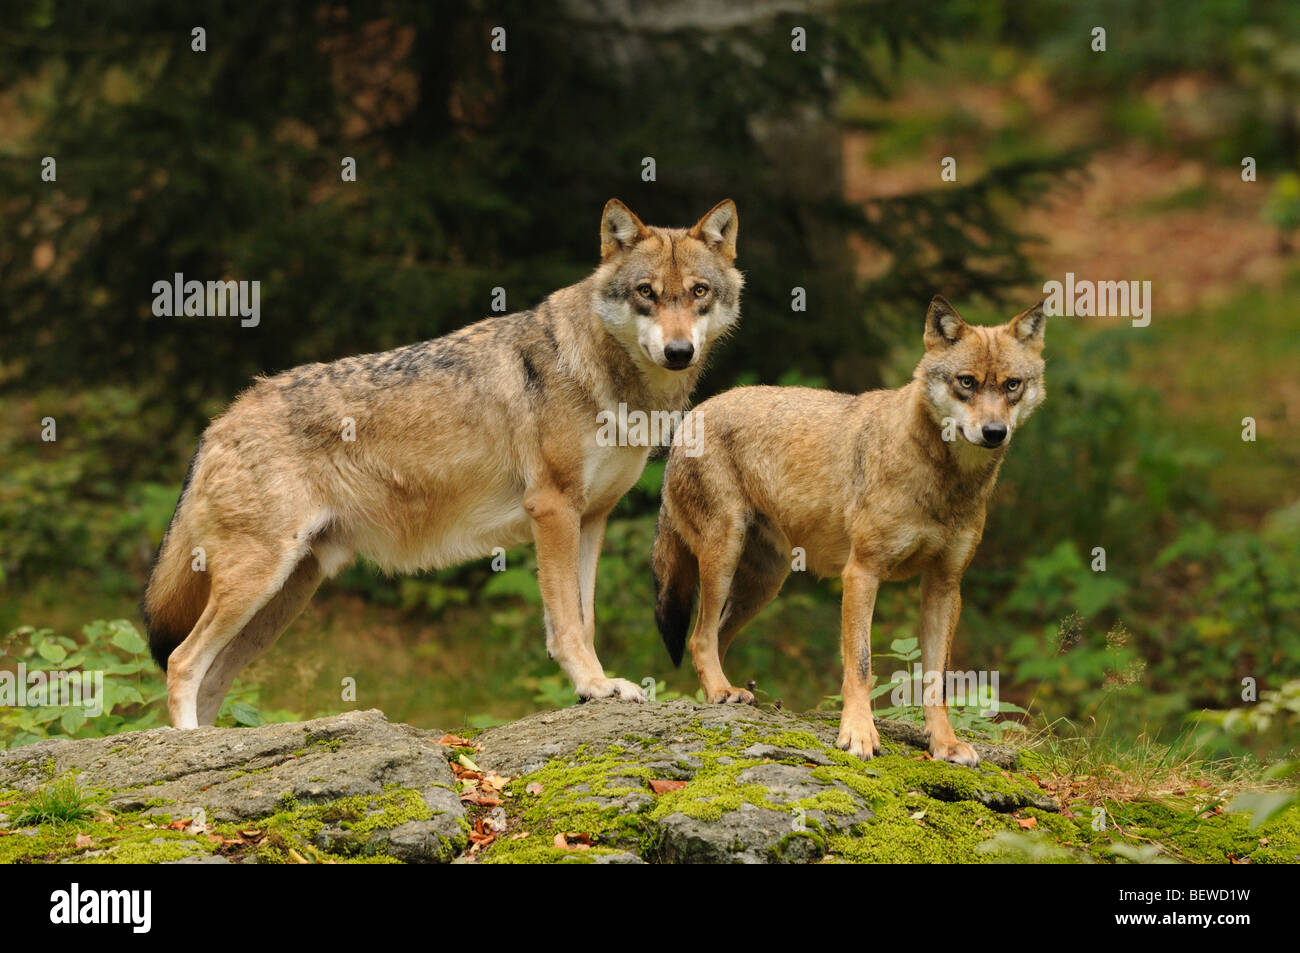 Two wolves (Canis lupus) standing on rock, Bavarian Forest, Germany ...